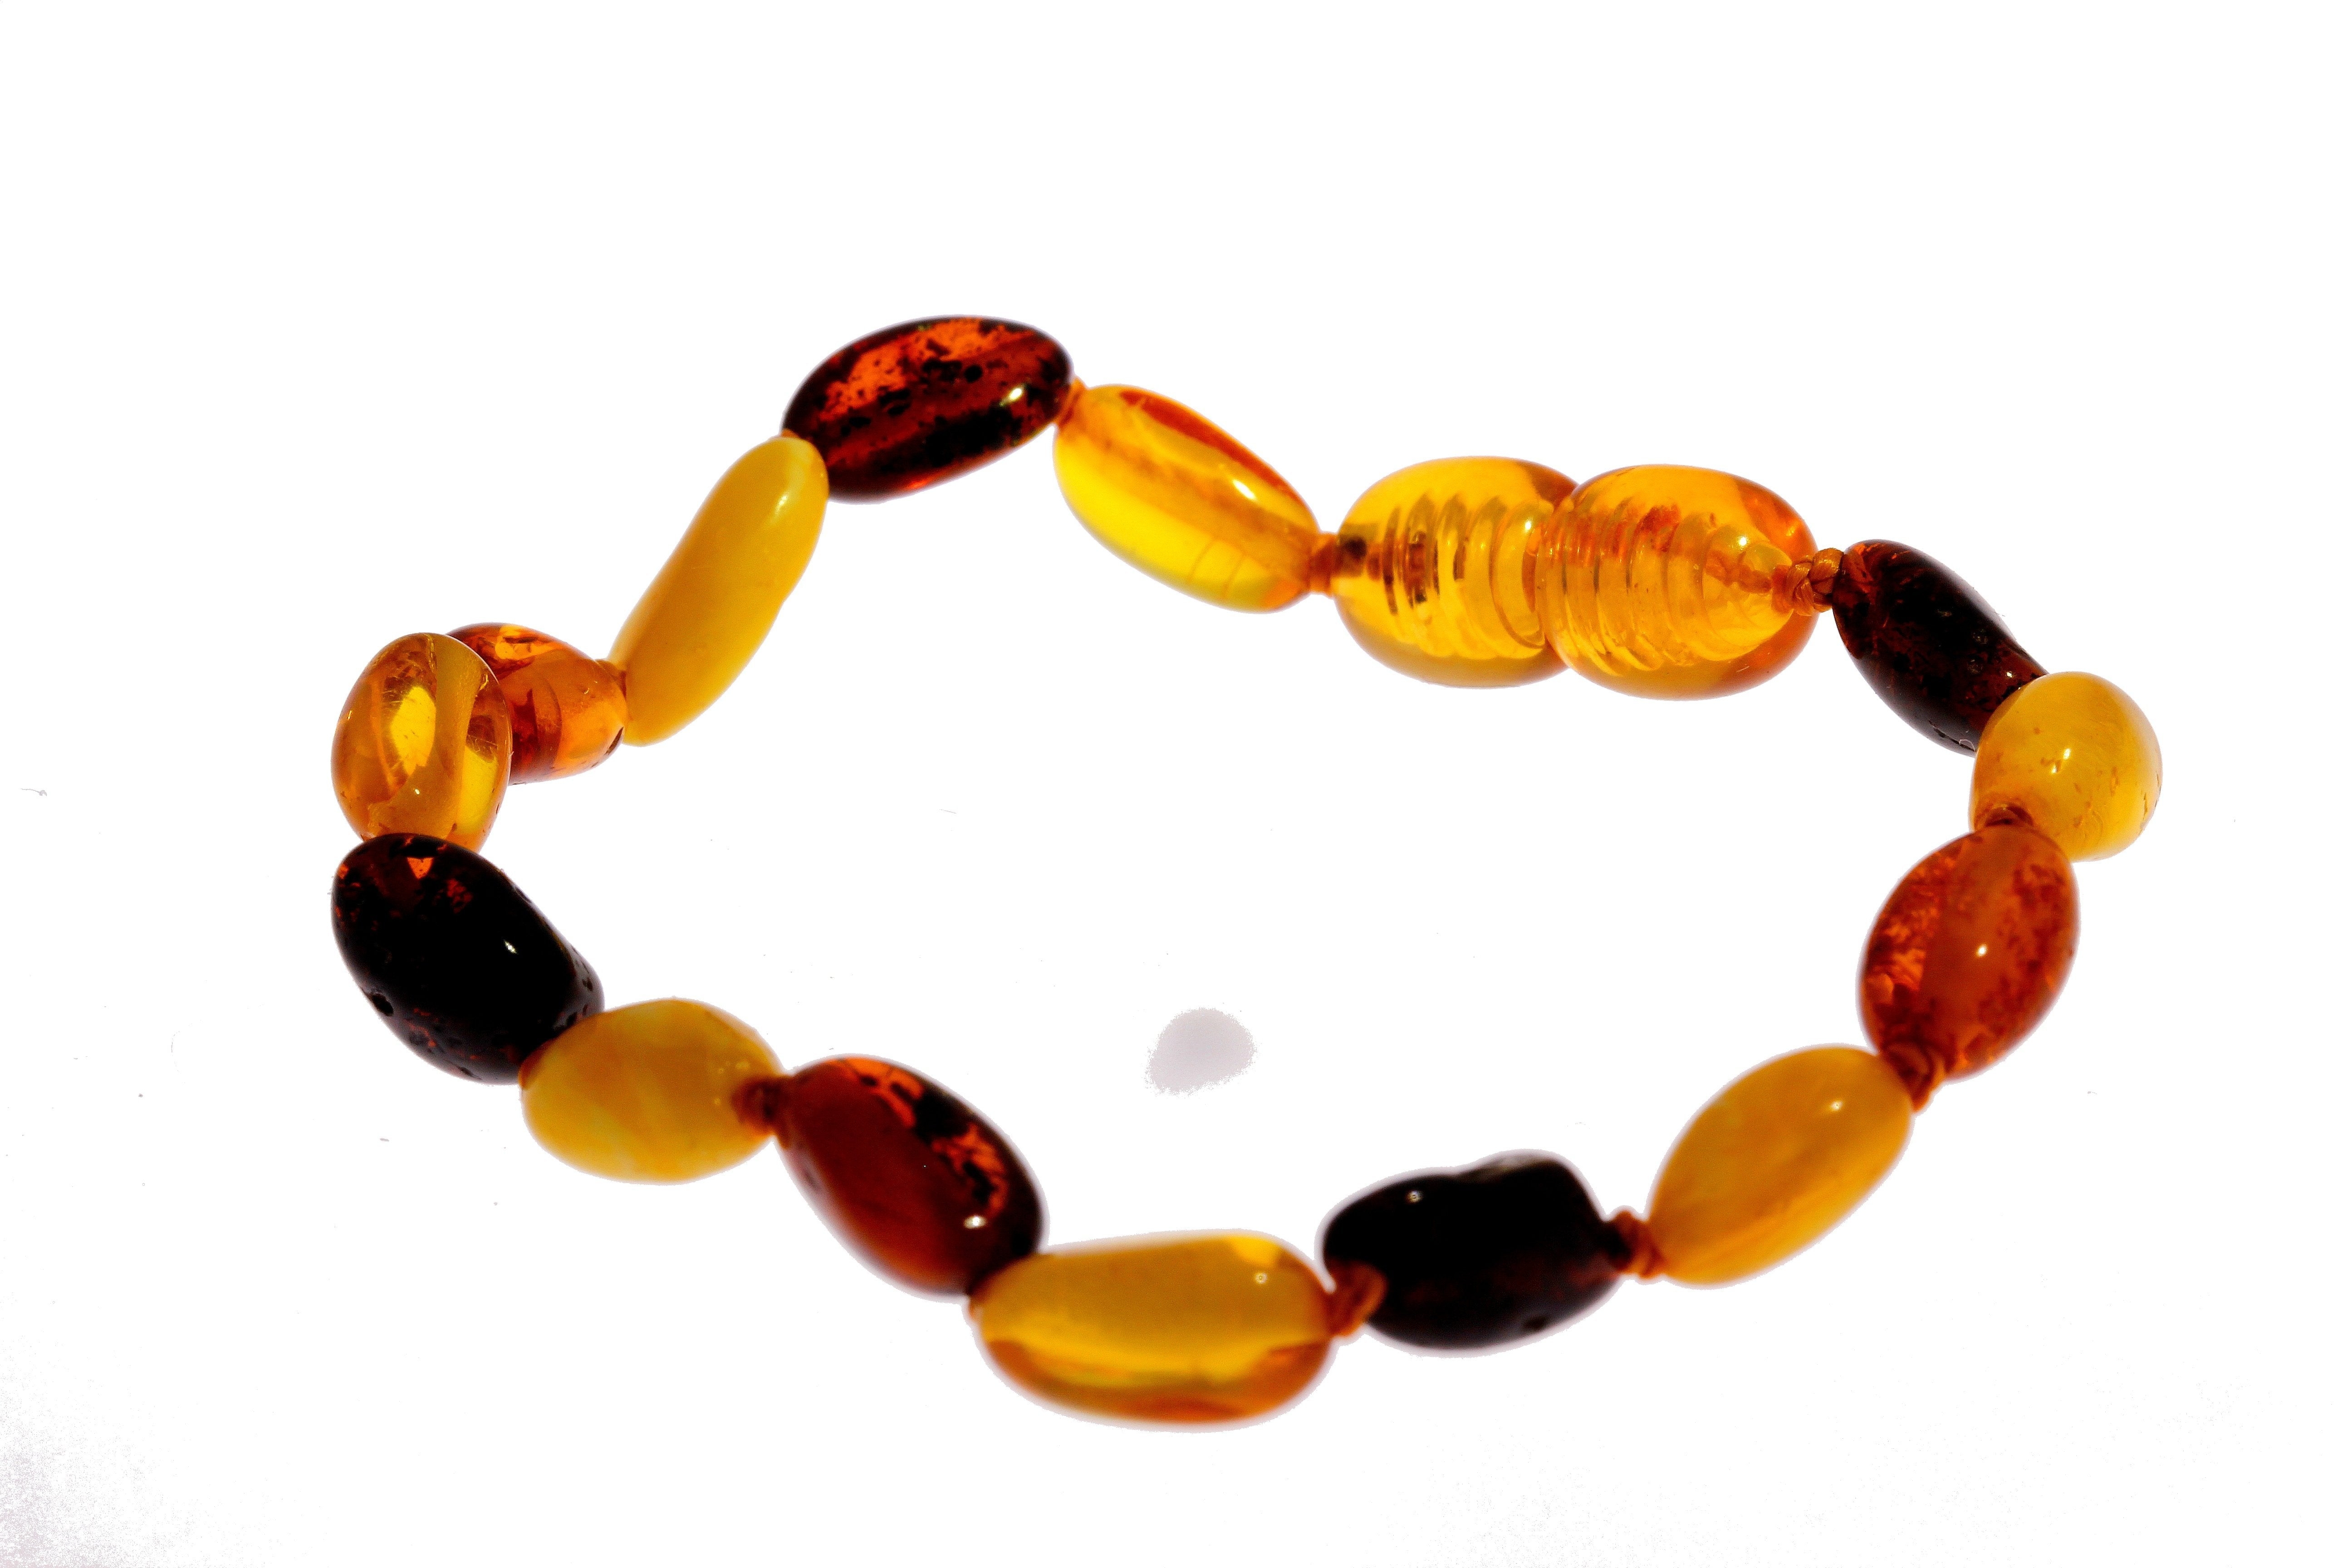 Certified Baltic Amber Beans Beads Bracelet in Mixed Colours – Sizes Baby to Adult 11cm – Caroline’s Collection – SilverAmberJewellery